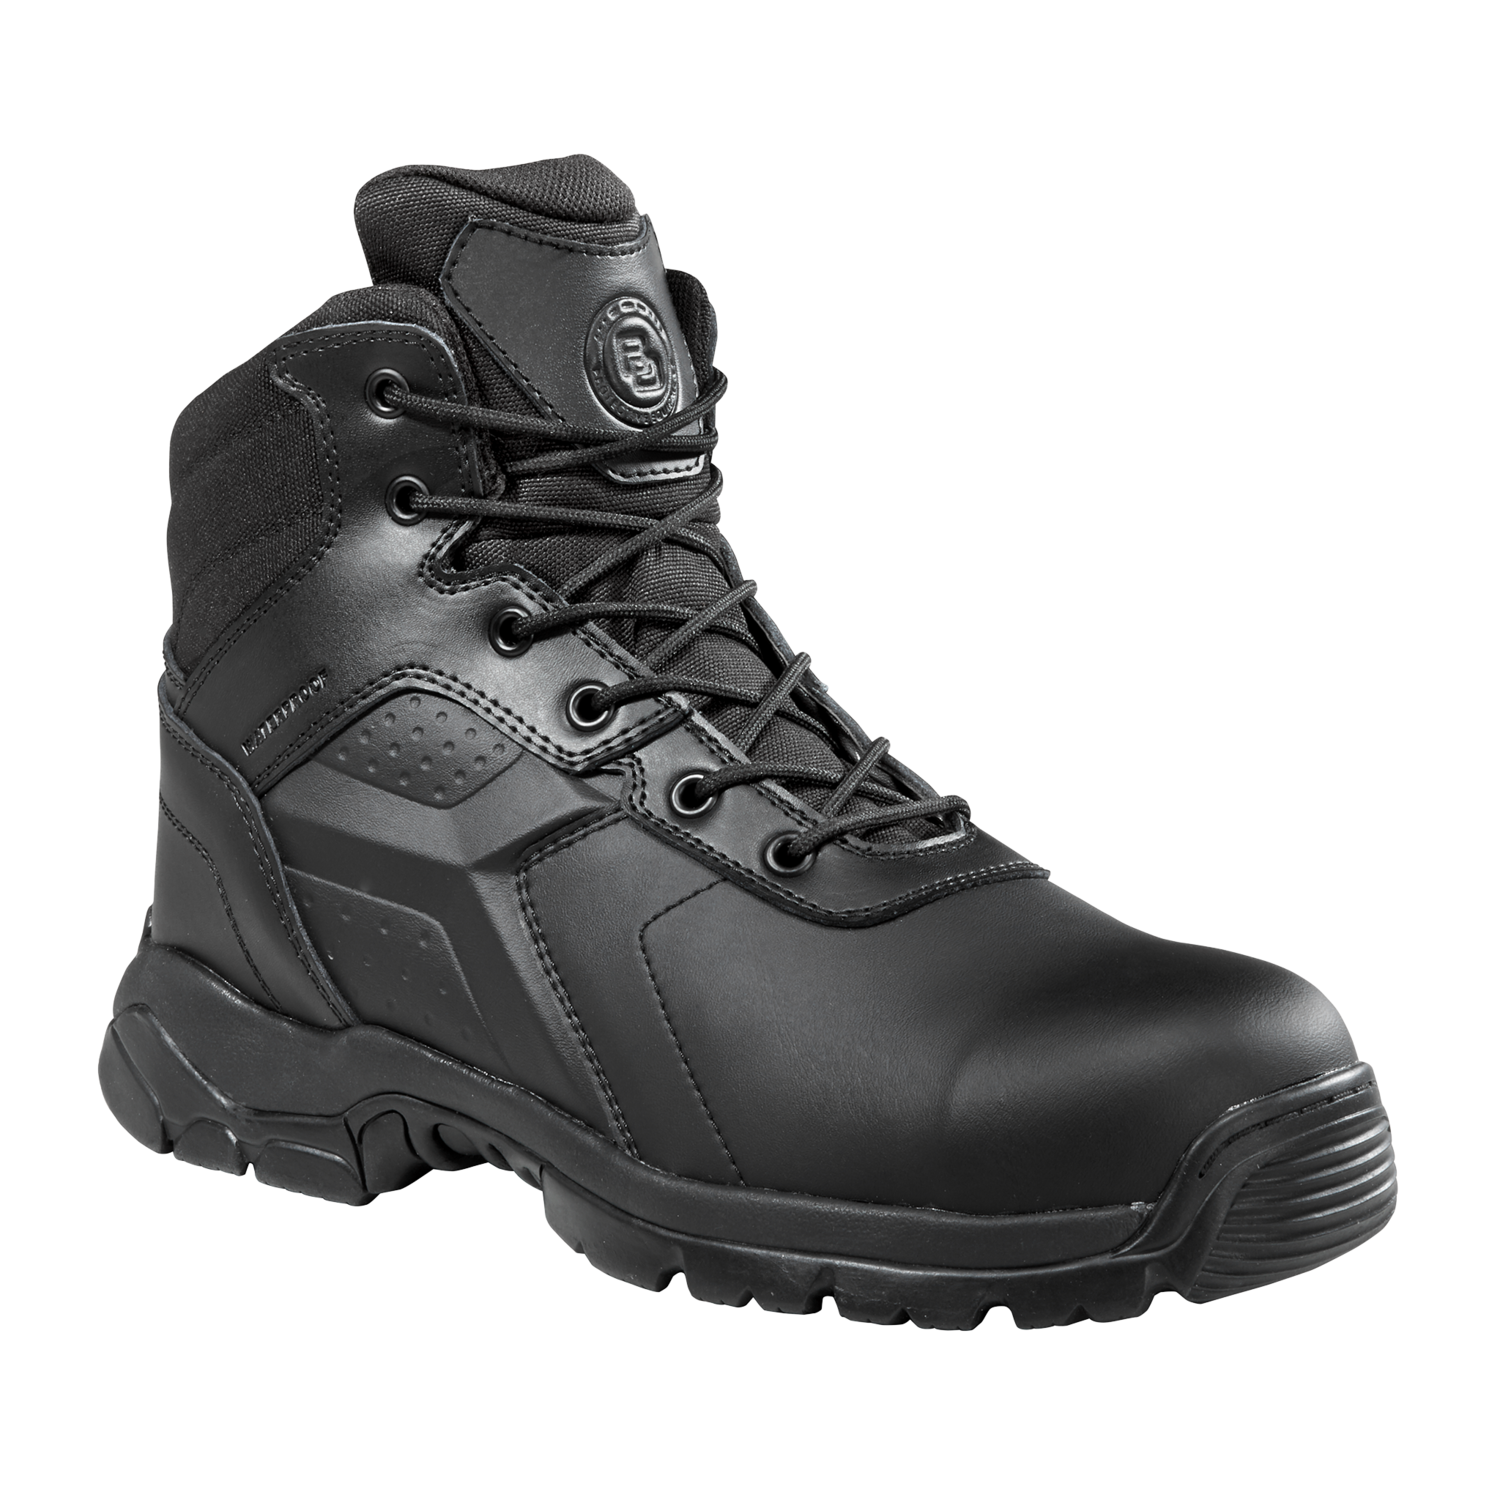 Black Diamond 6-INCH WATERPROOF TACTICAL BOOT - SIDE ZIP COMPOSITE SAFETY TOE